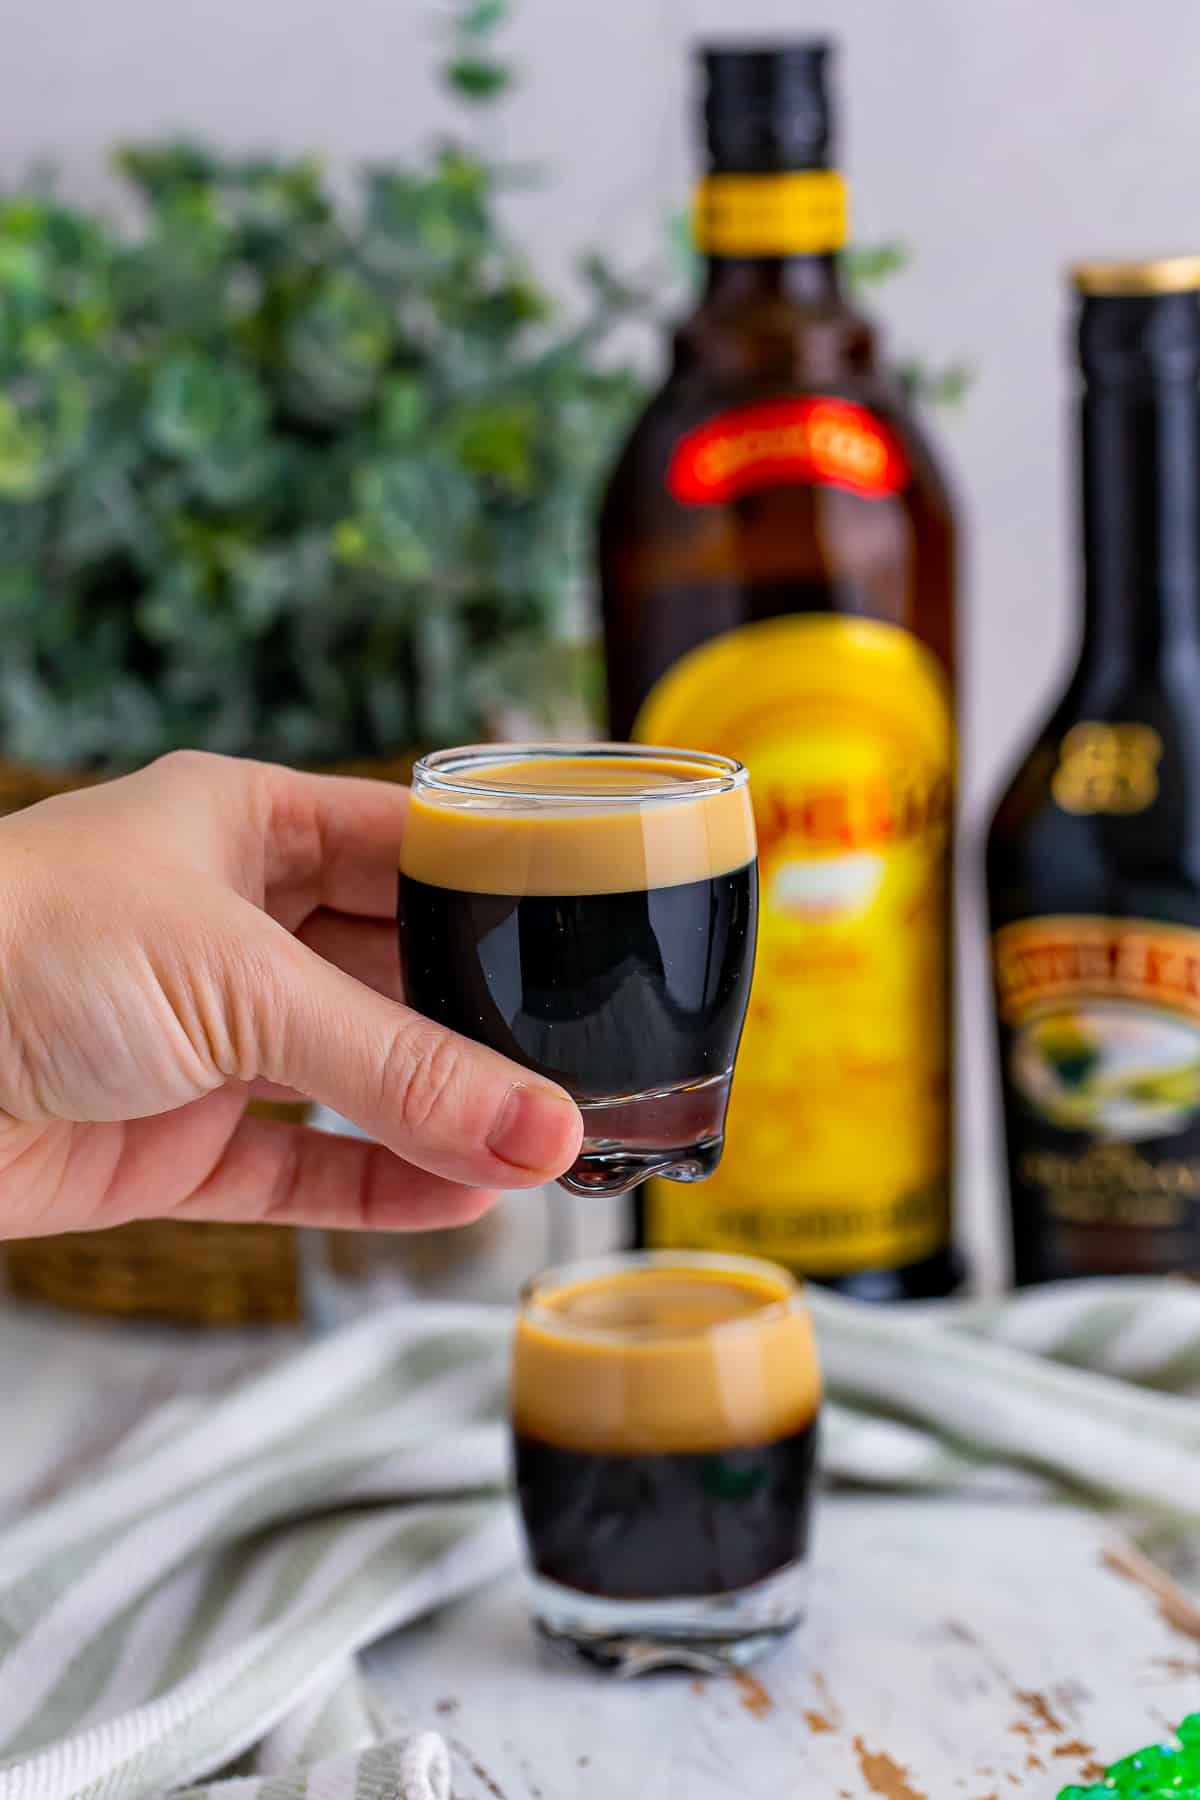 Baby Guinness Shot held in hand, plant in wicker holder in back ground with alcohol bottles